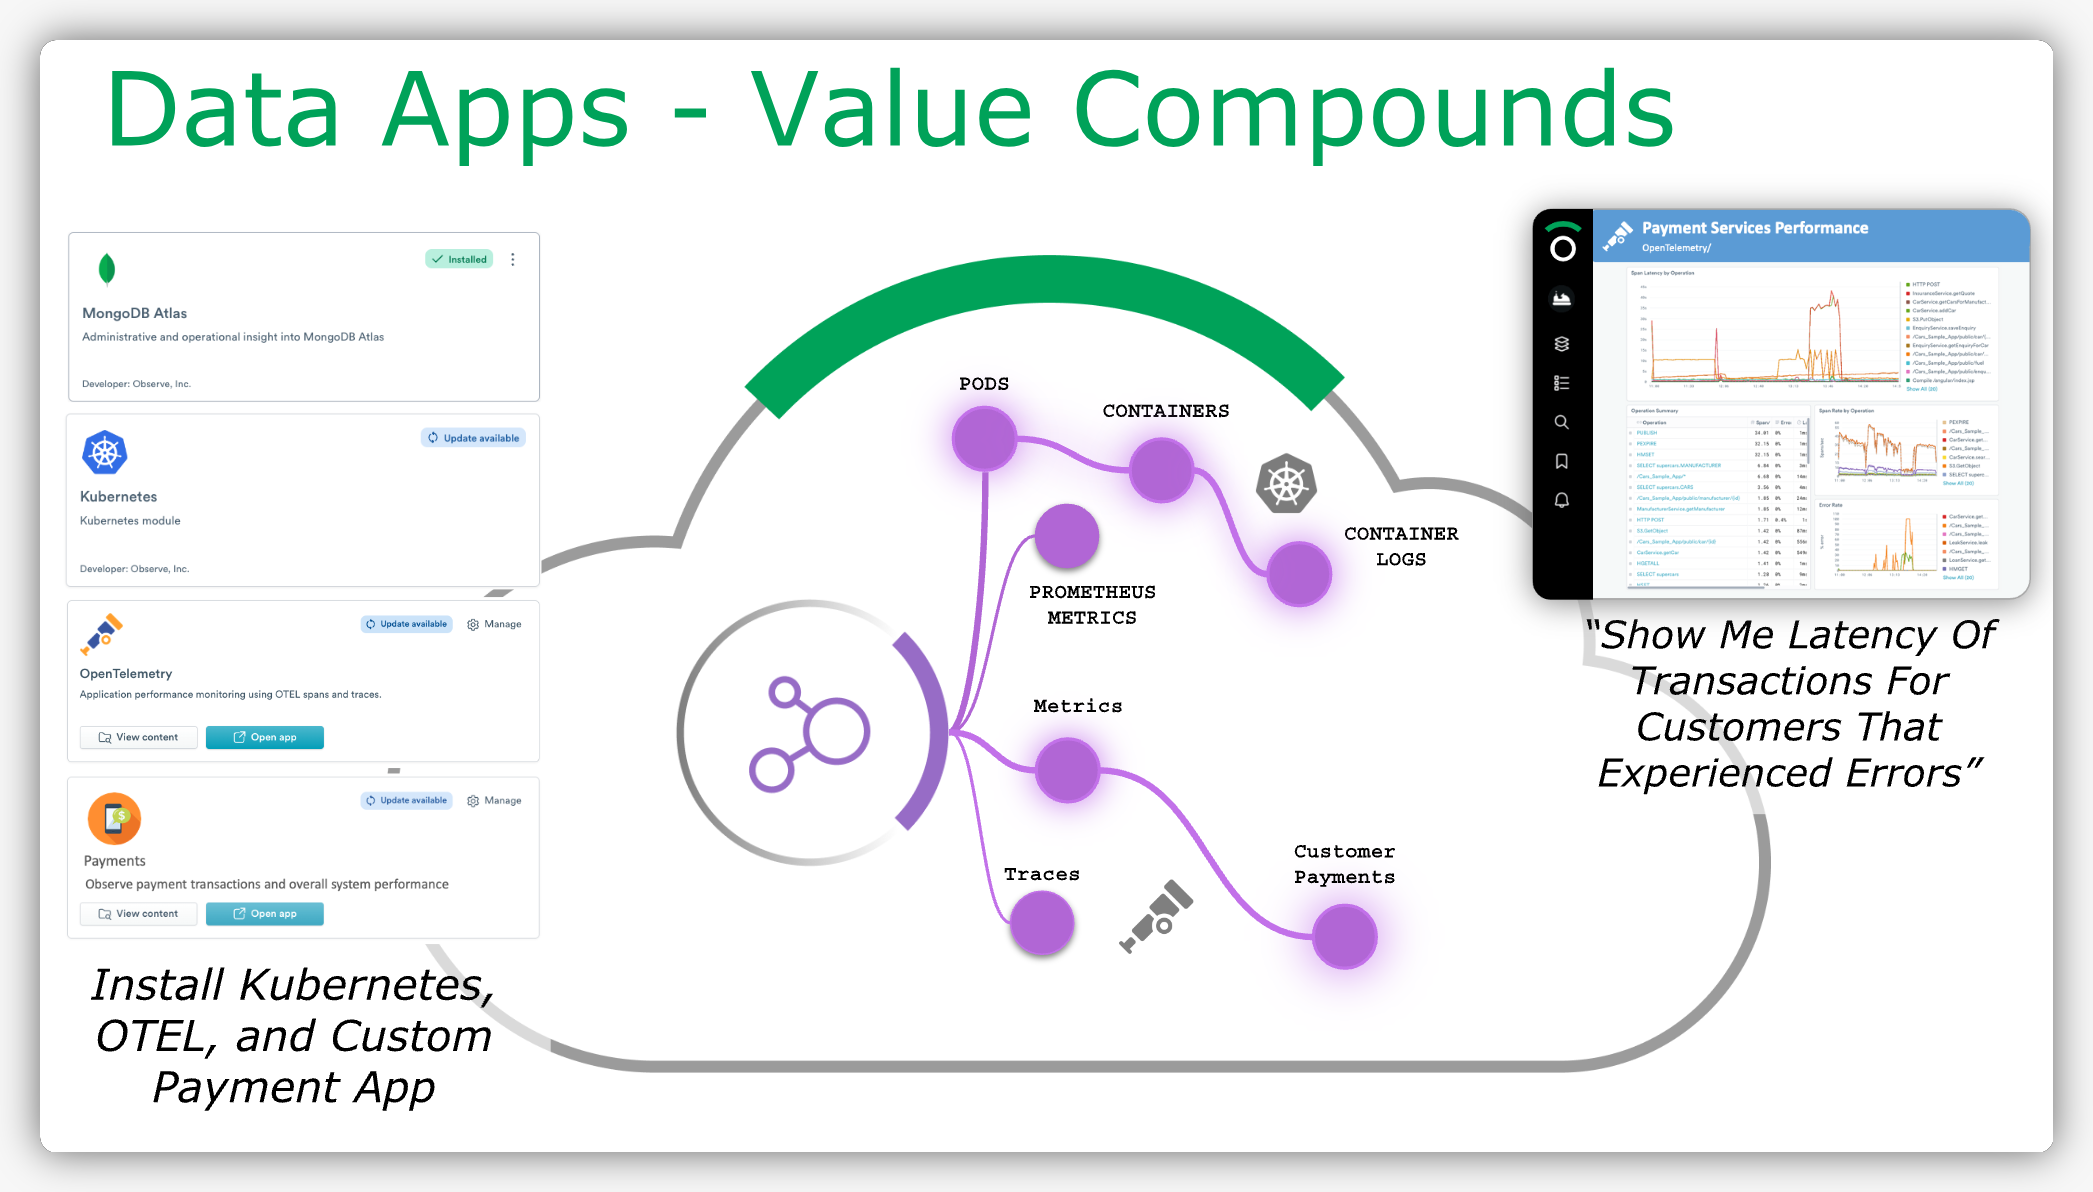 Value compounds with more data apps in observe